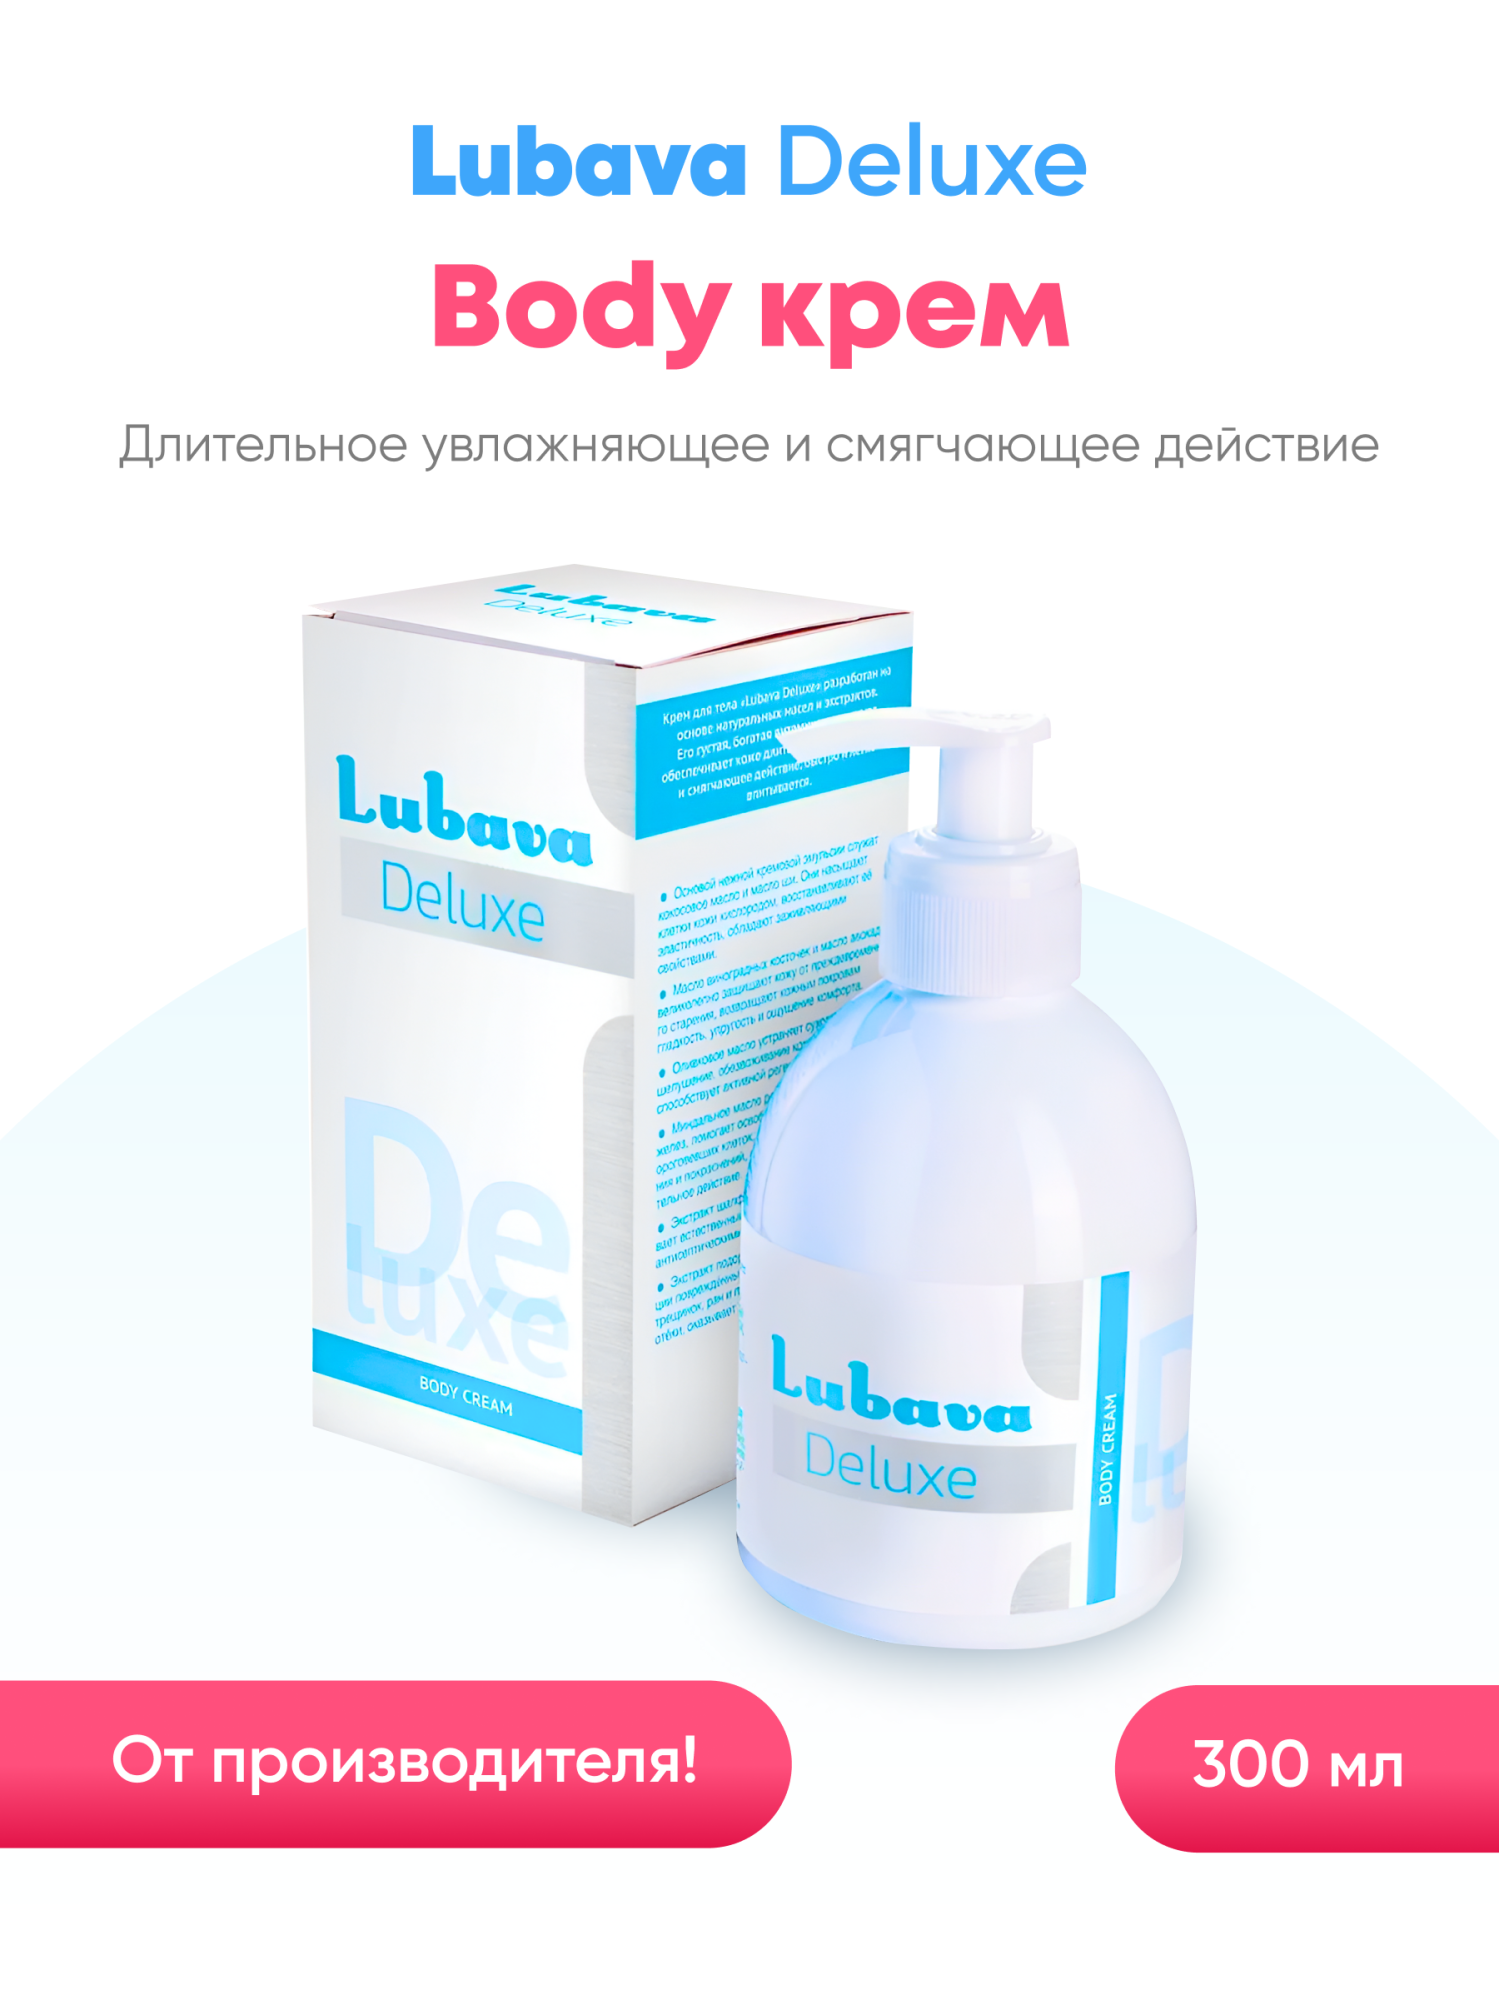 Lubava Deluxe Body cream крем для тела 300 мл. крем для тела zeitun body cream with damask rose oil 200 мл